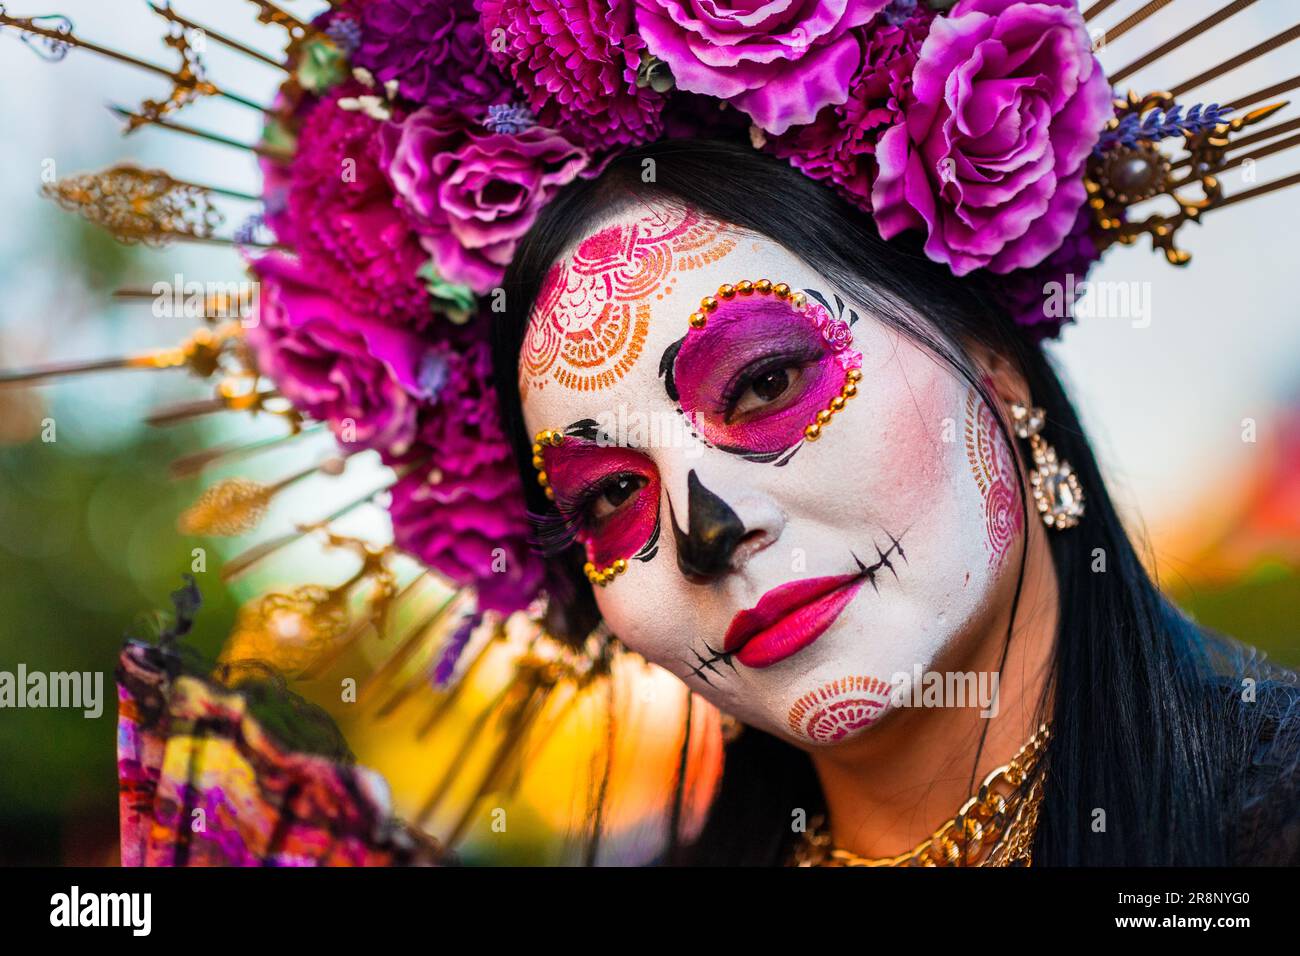 A young Mexican woman, dressed as La Catrina, takes part in the Day of the Dead festivities in Tlaquepaque, Mexico. Stock Photo